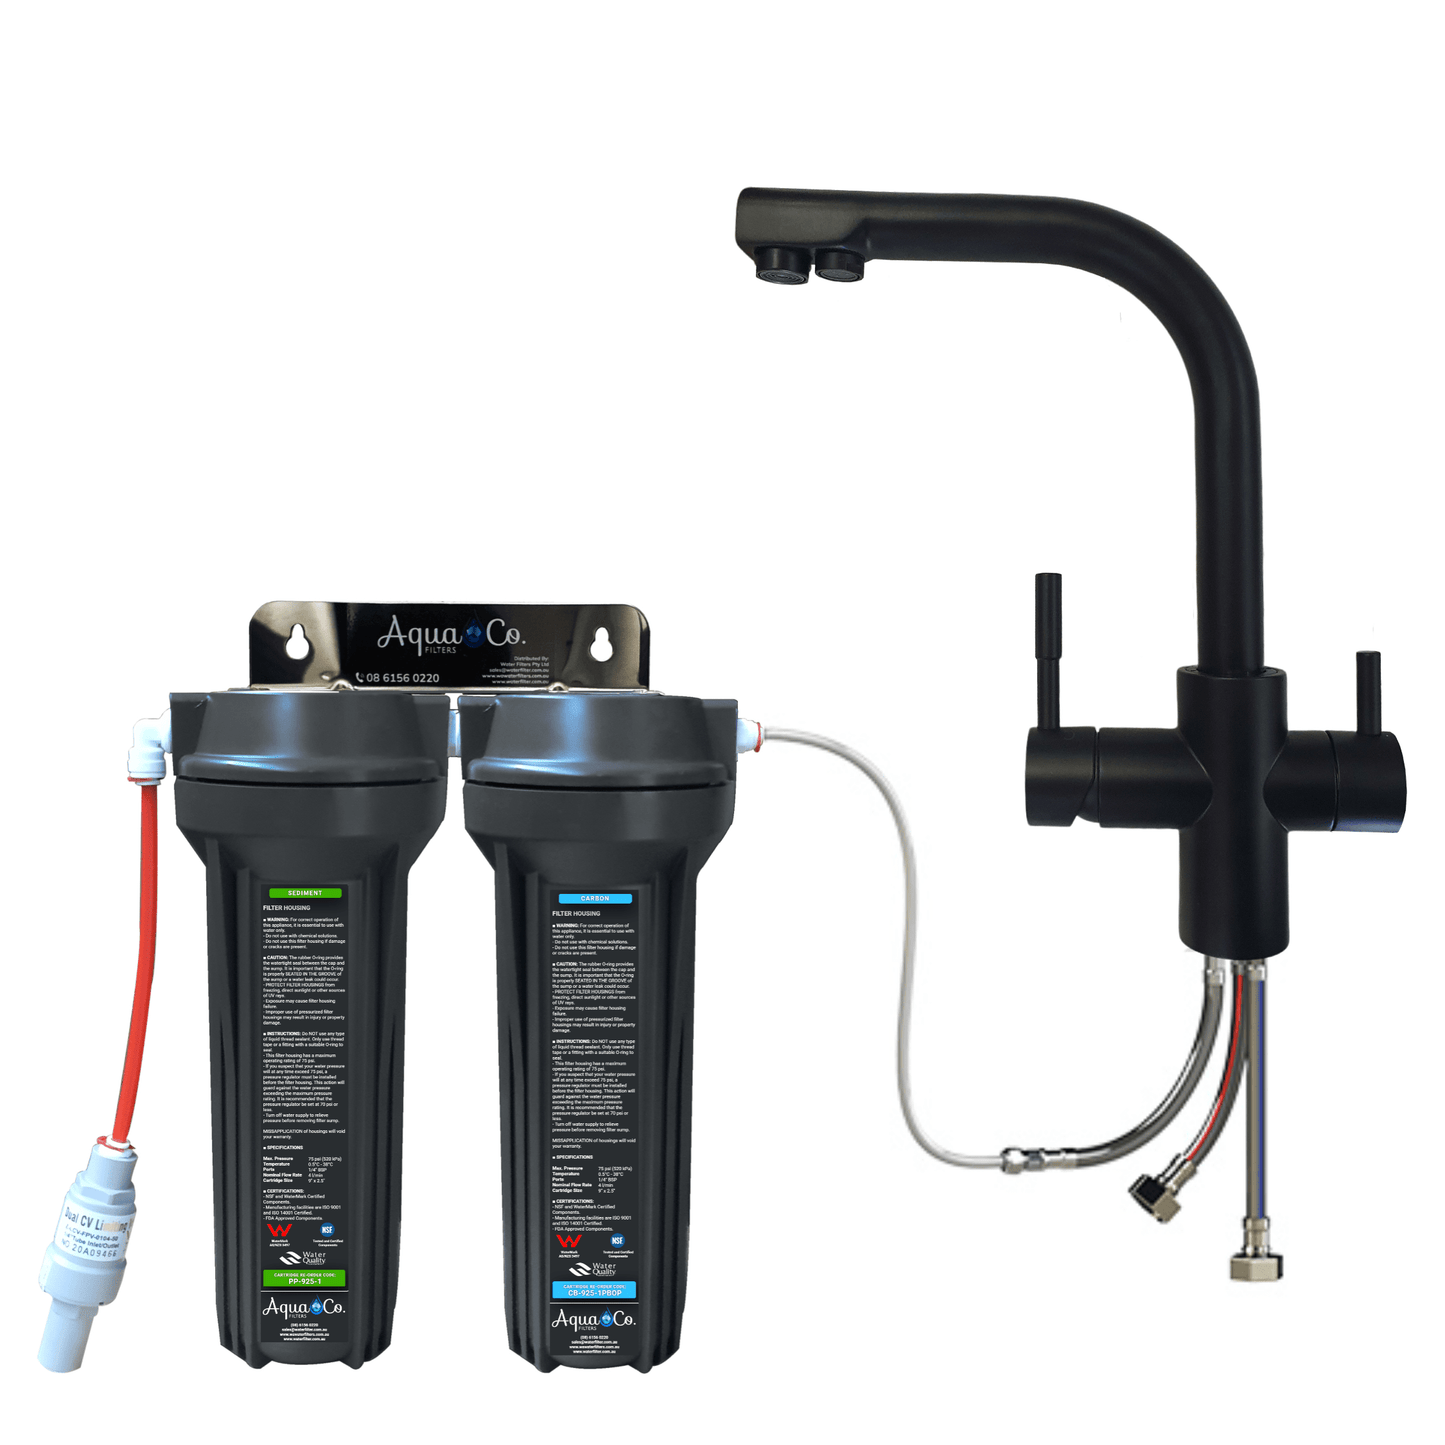 3 Way Mixer Tap with AquaCo SYS-925SC Undersink Water Filter - Reduces Chlorine, Taste, Odours, Parasites, and Lead.